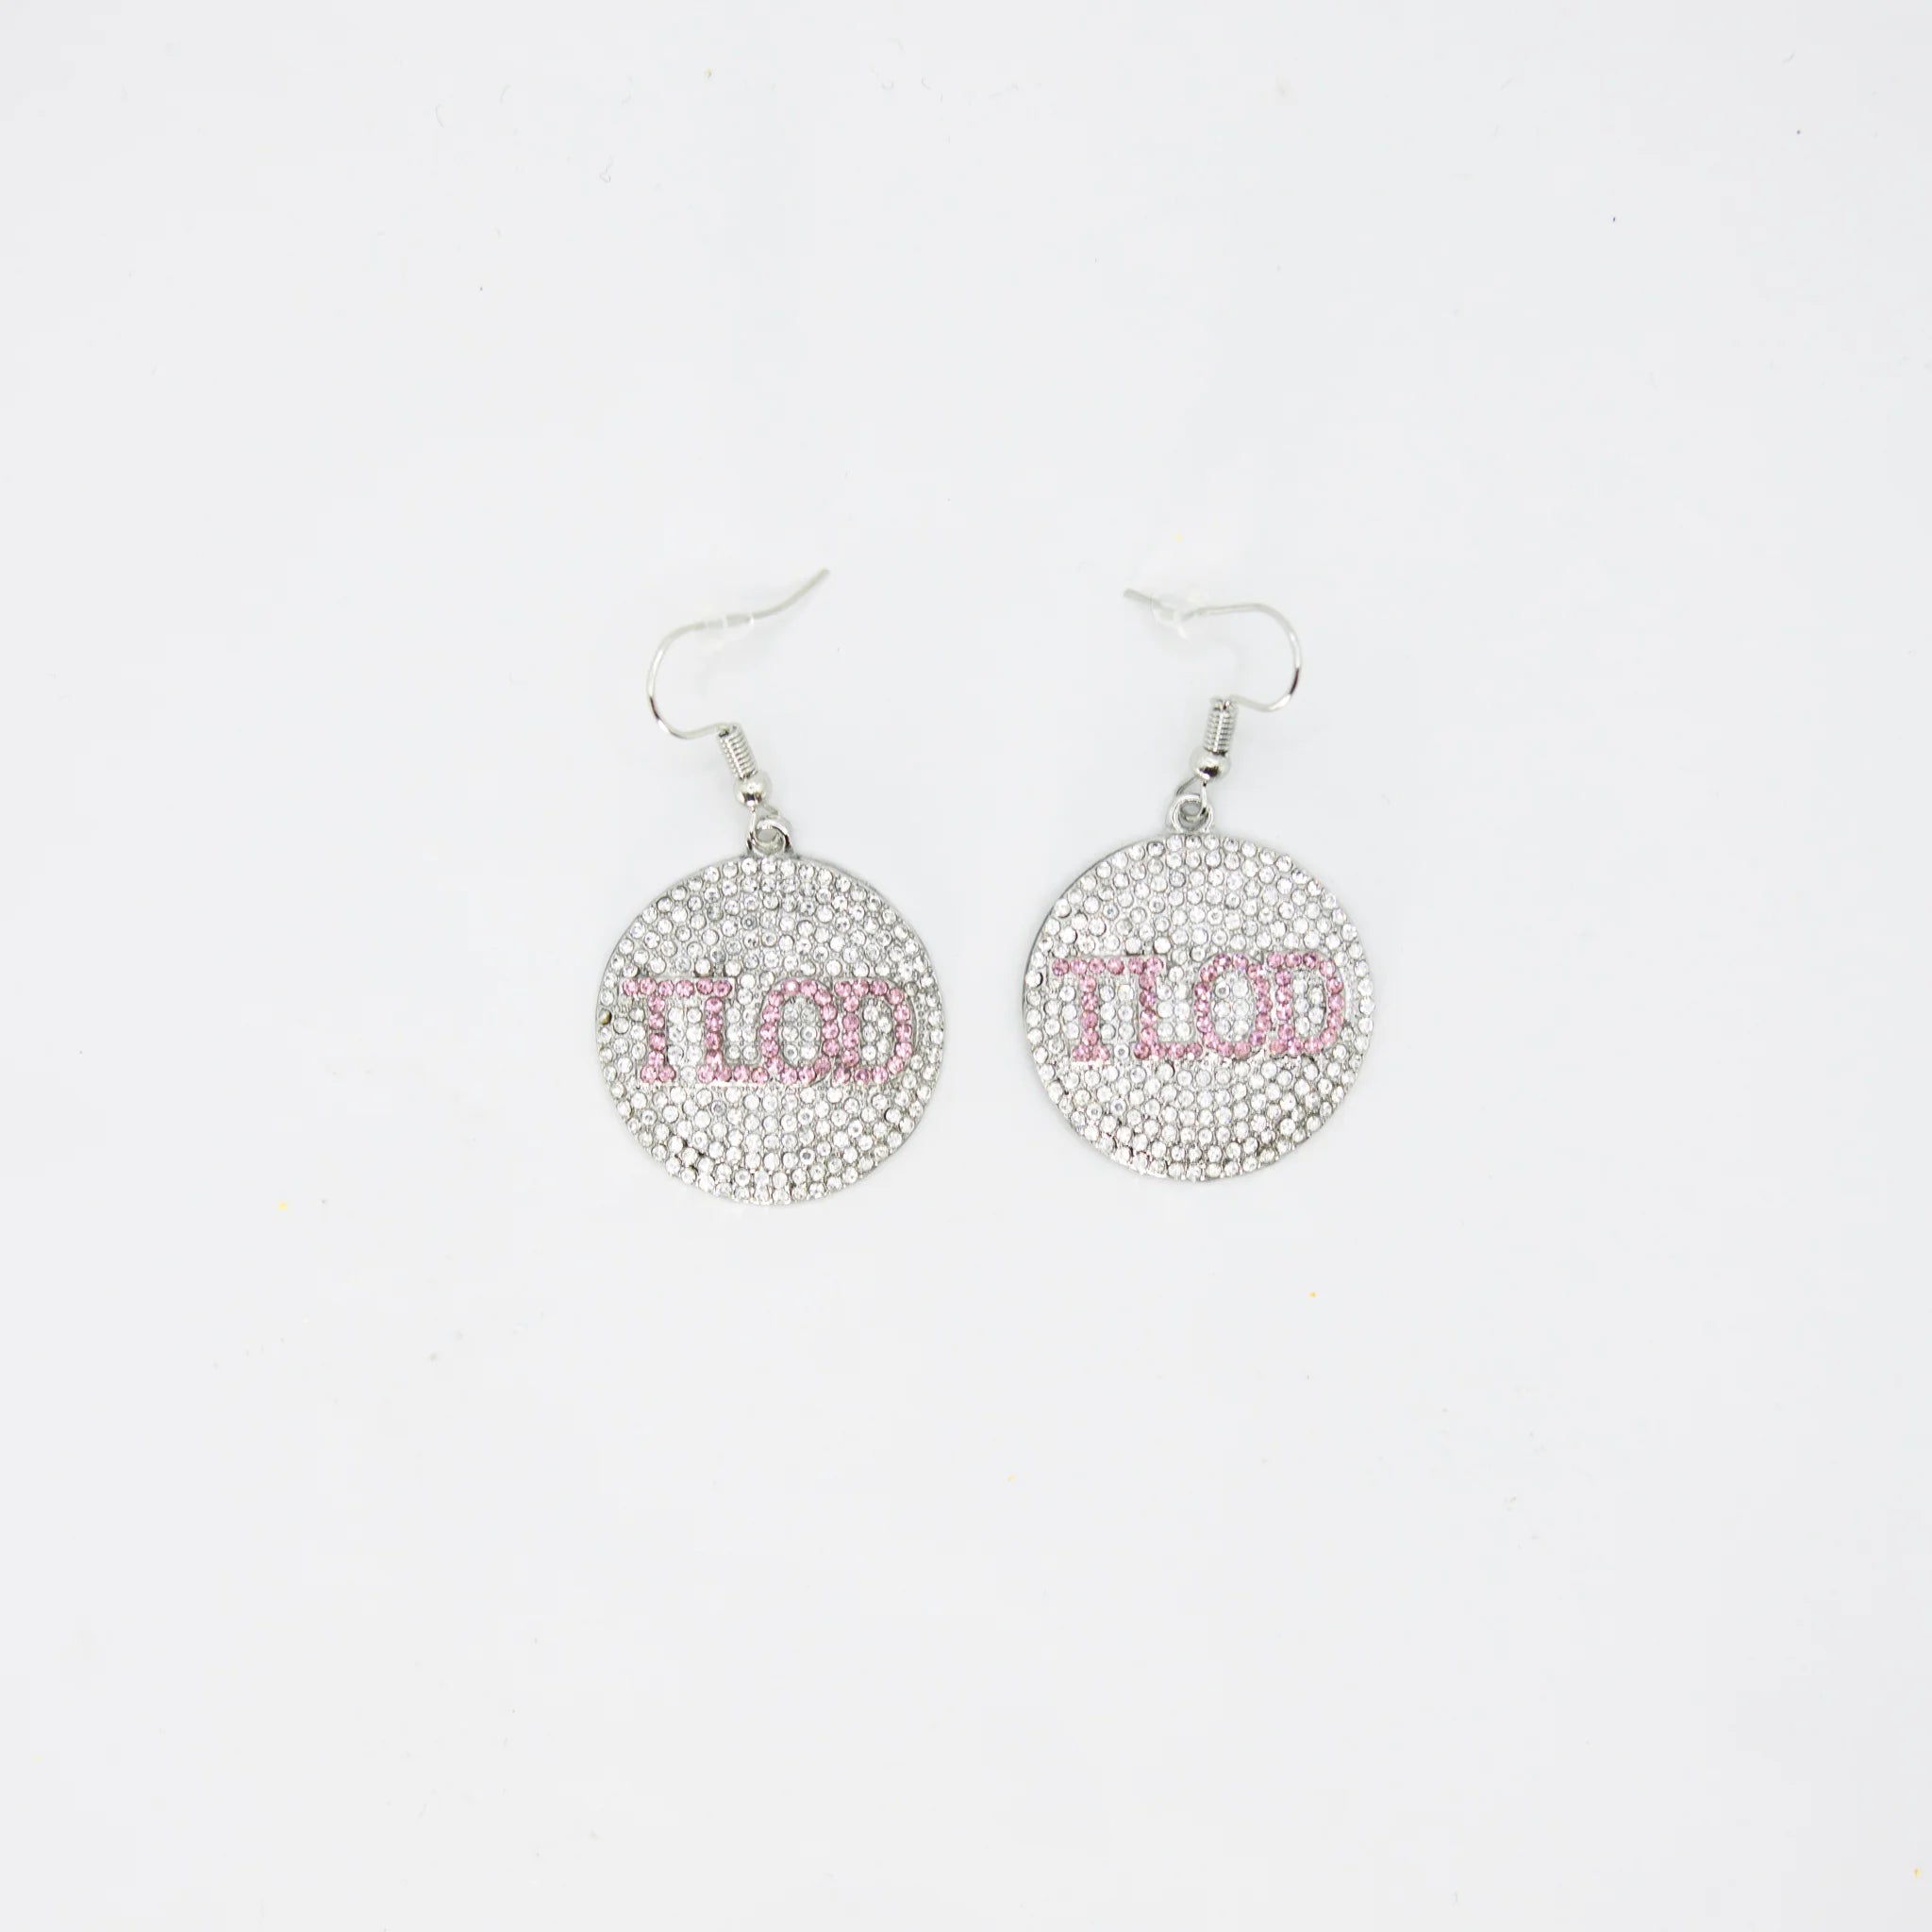 TLOD Silver Circle Earrings - Diva Starr Boutique